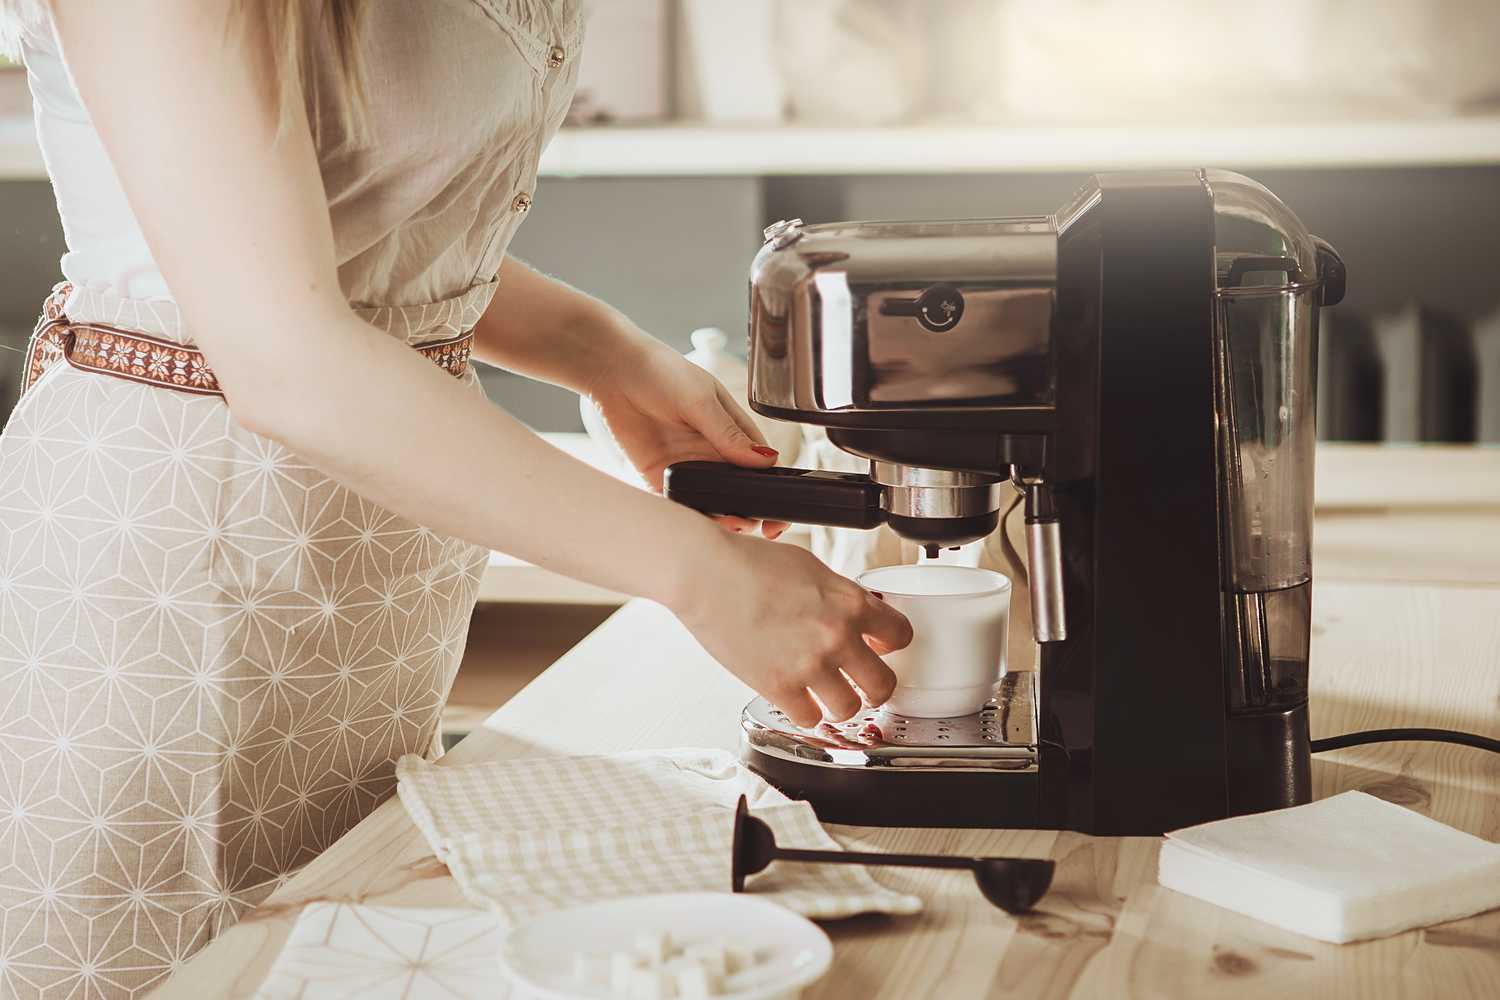 What Does It Mean To Descale A Coffee Machine?